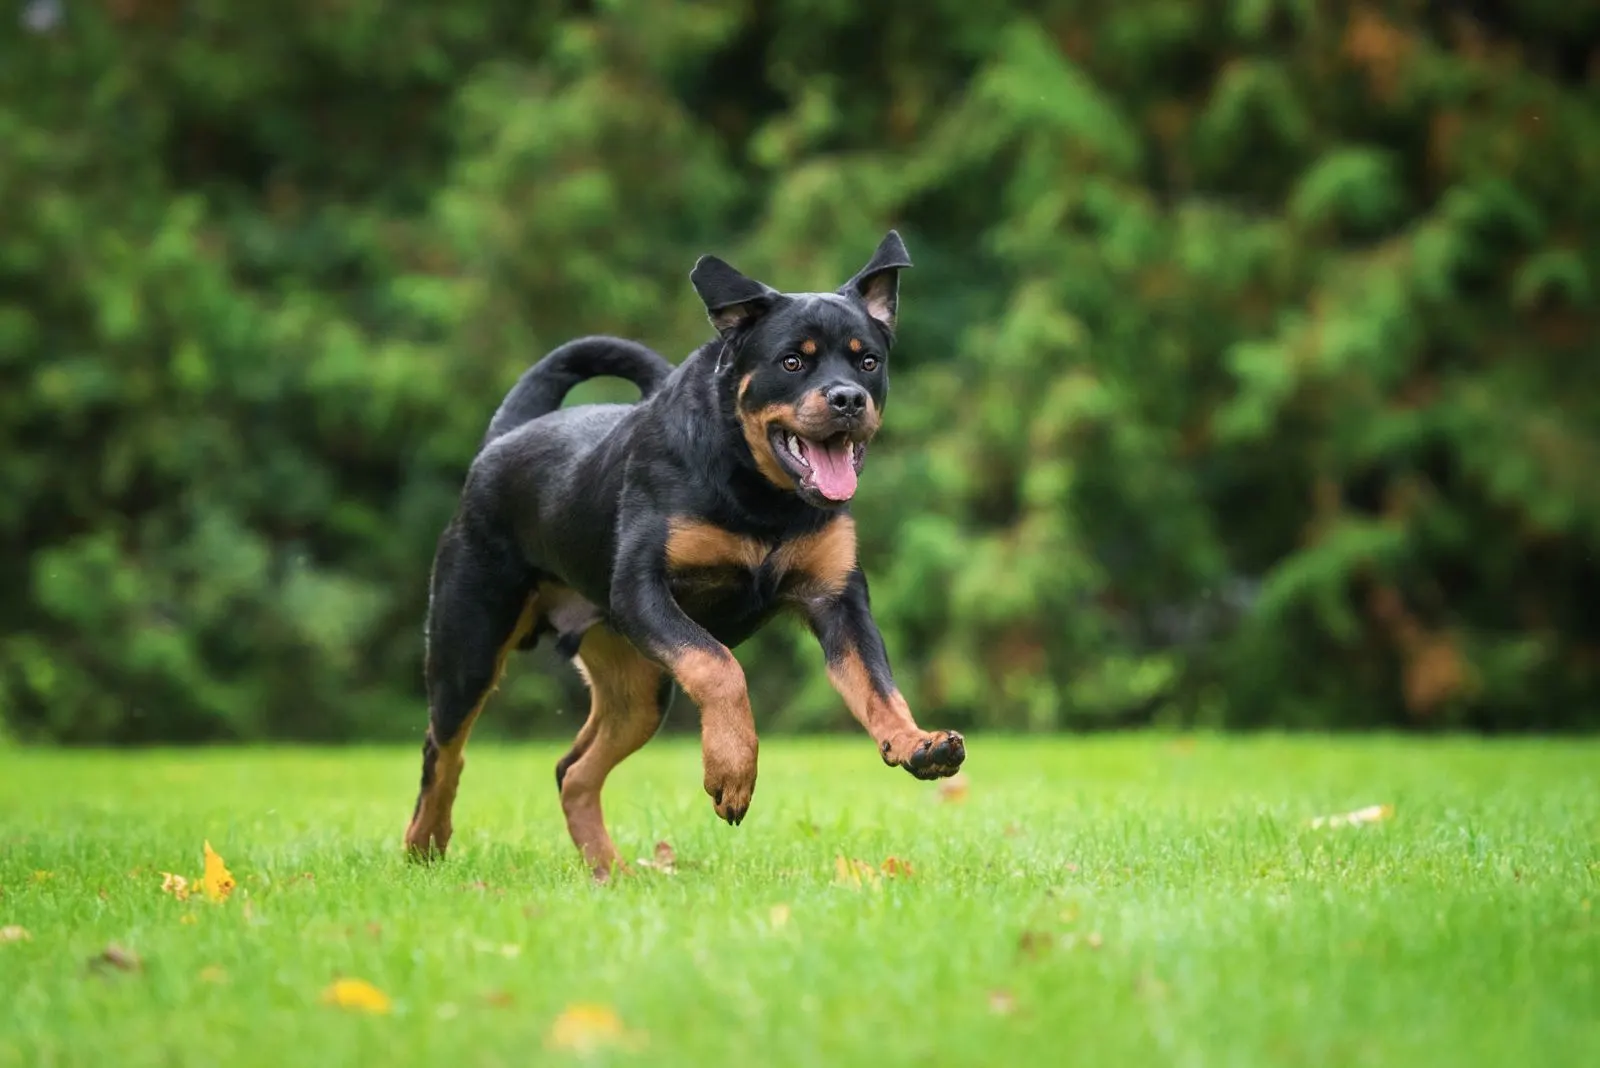 Why Is My Rottweiler So Clingy: 7 Possible Reasons